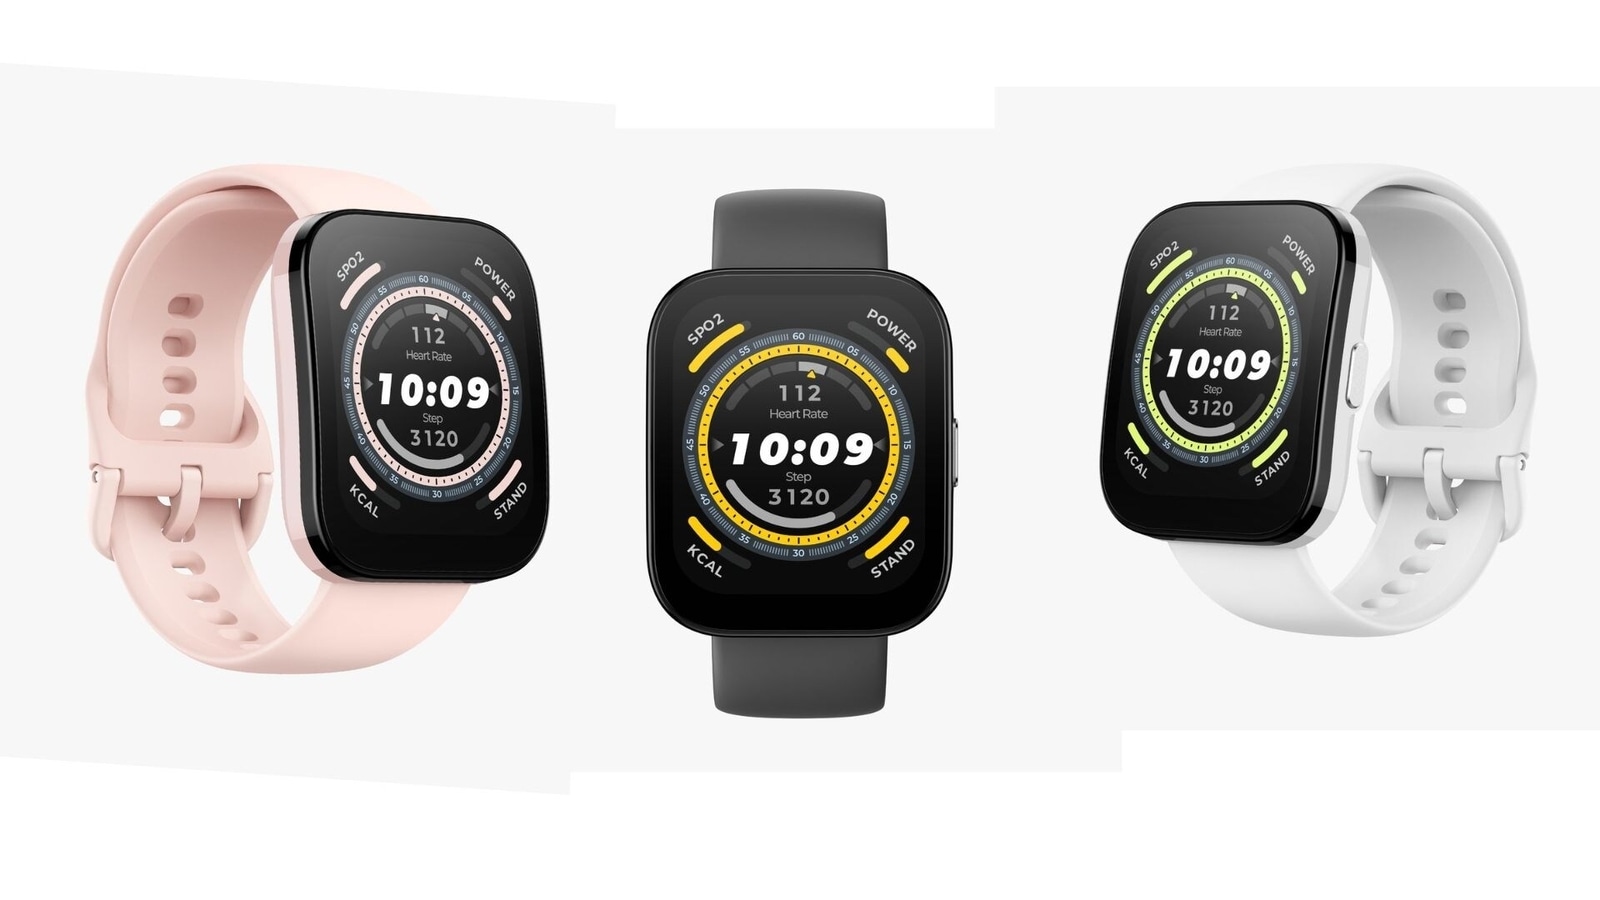 Bip 5 budget smartwatch sports Amazfit's largest screen to date